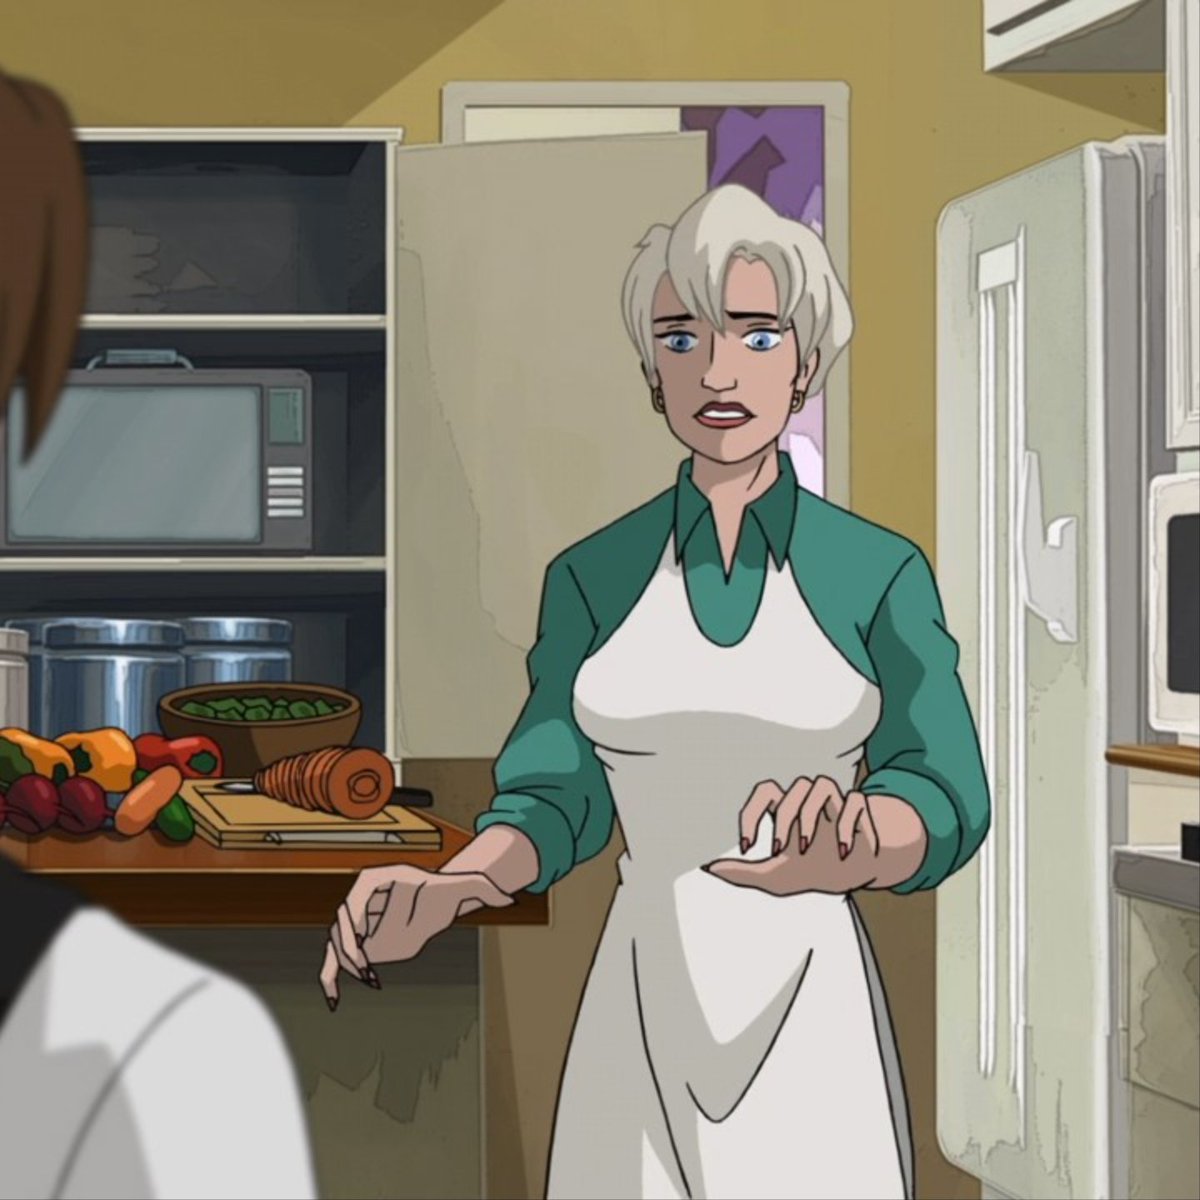 Ultimate Aunt May has it going onpic.twitter.com/Sgm6jPOzp7. 